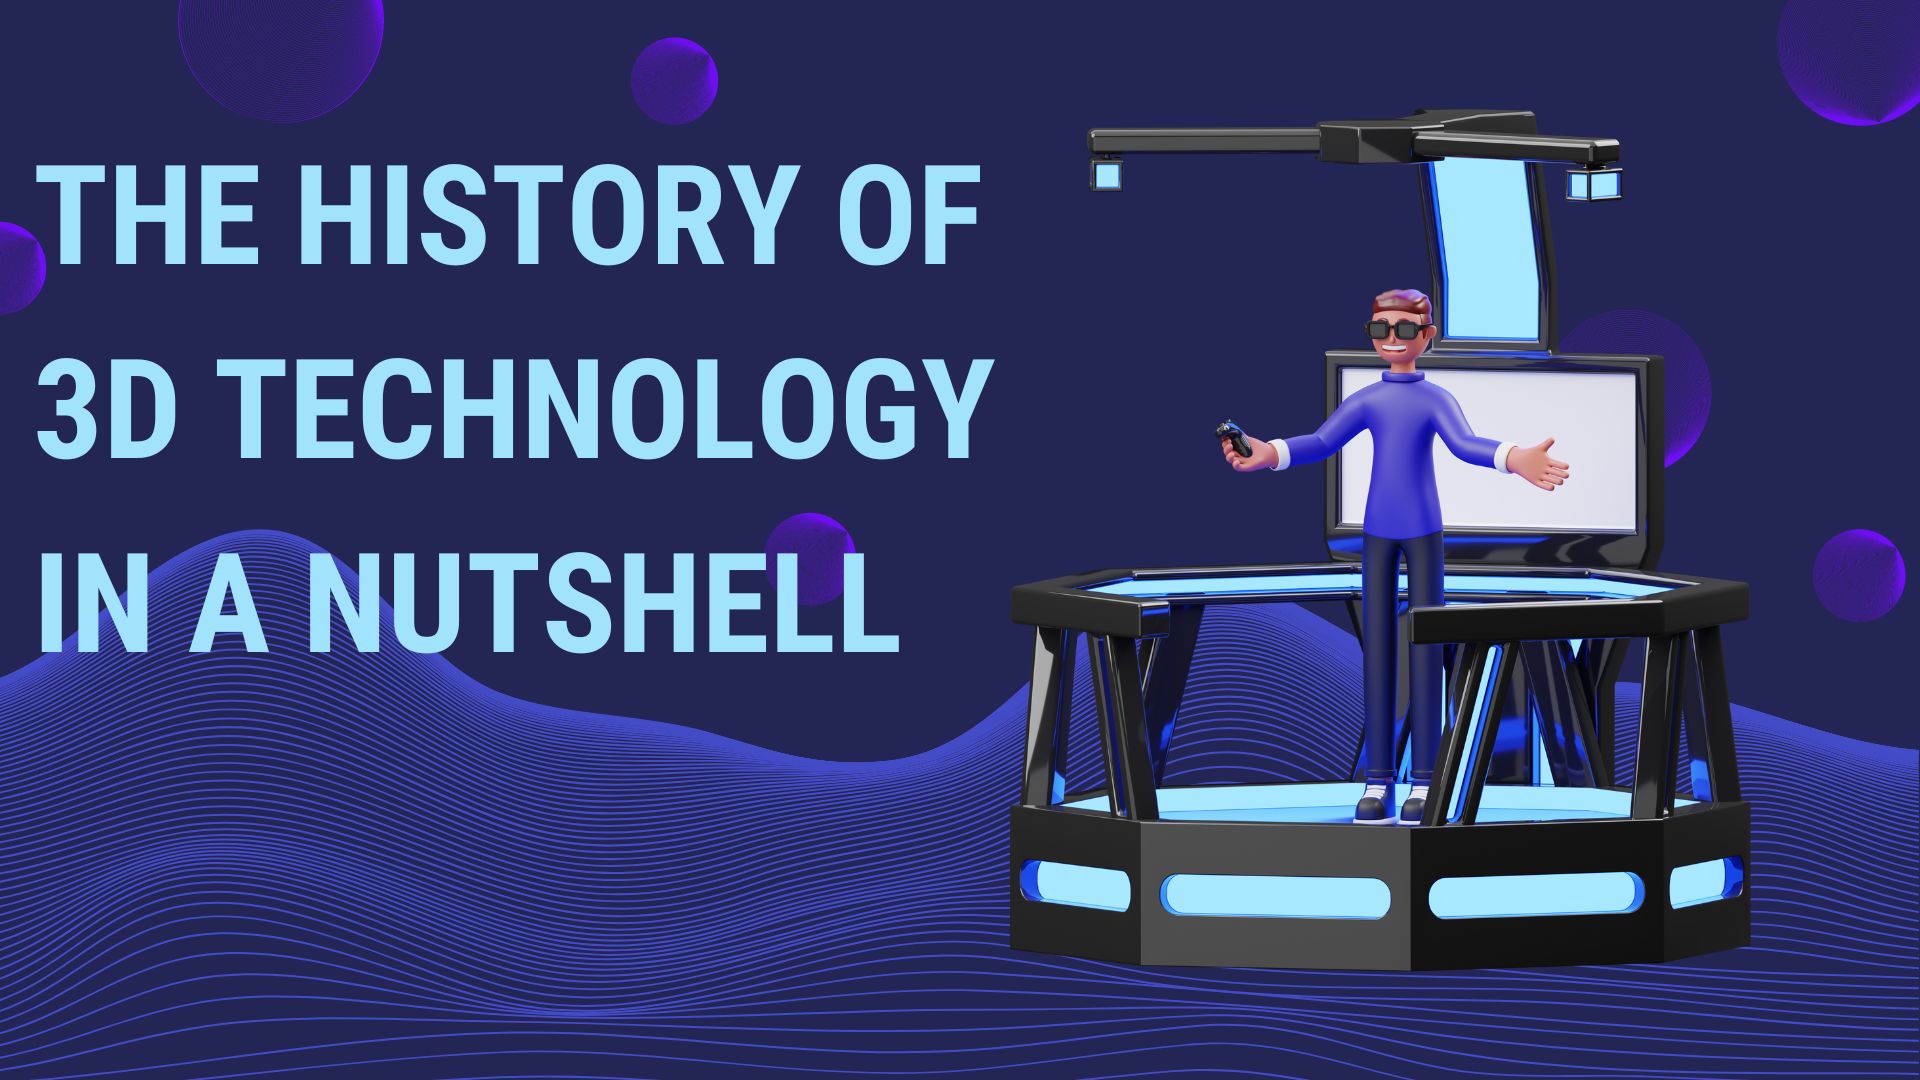 The History of 3D Technology in a Nutshell